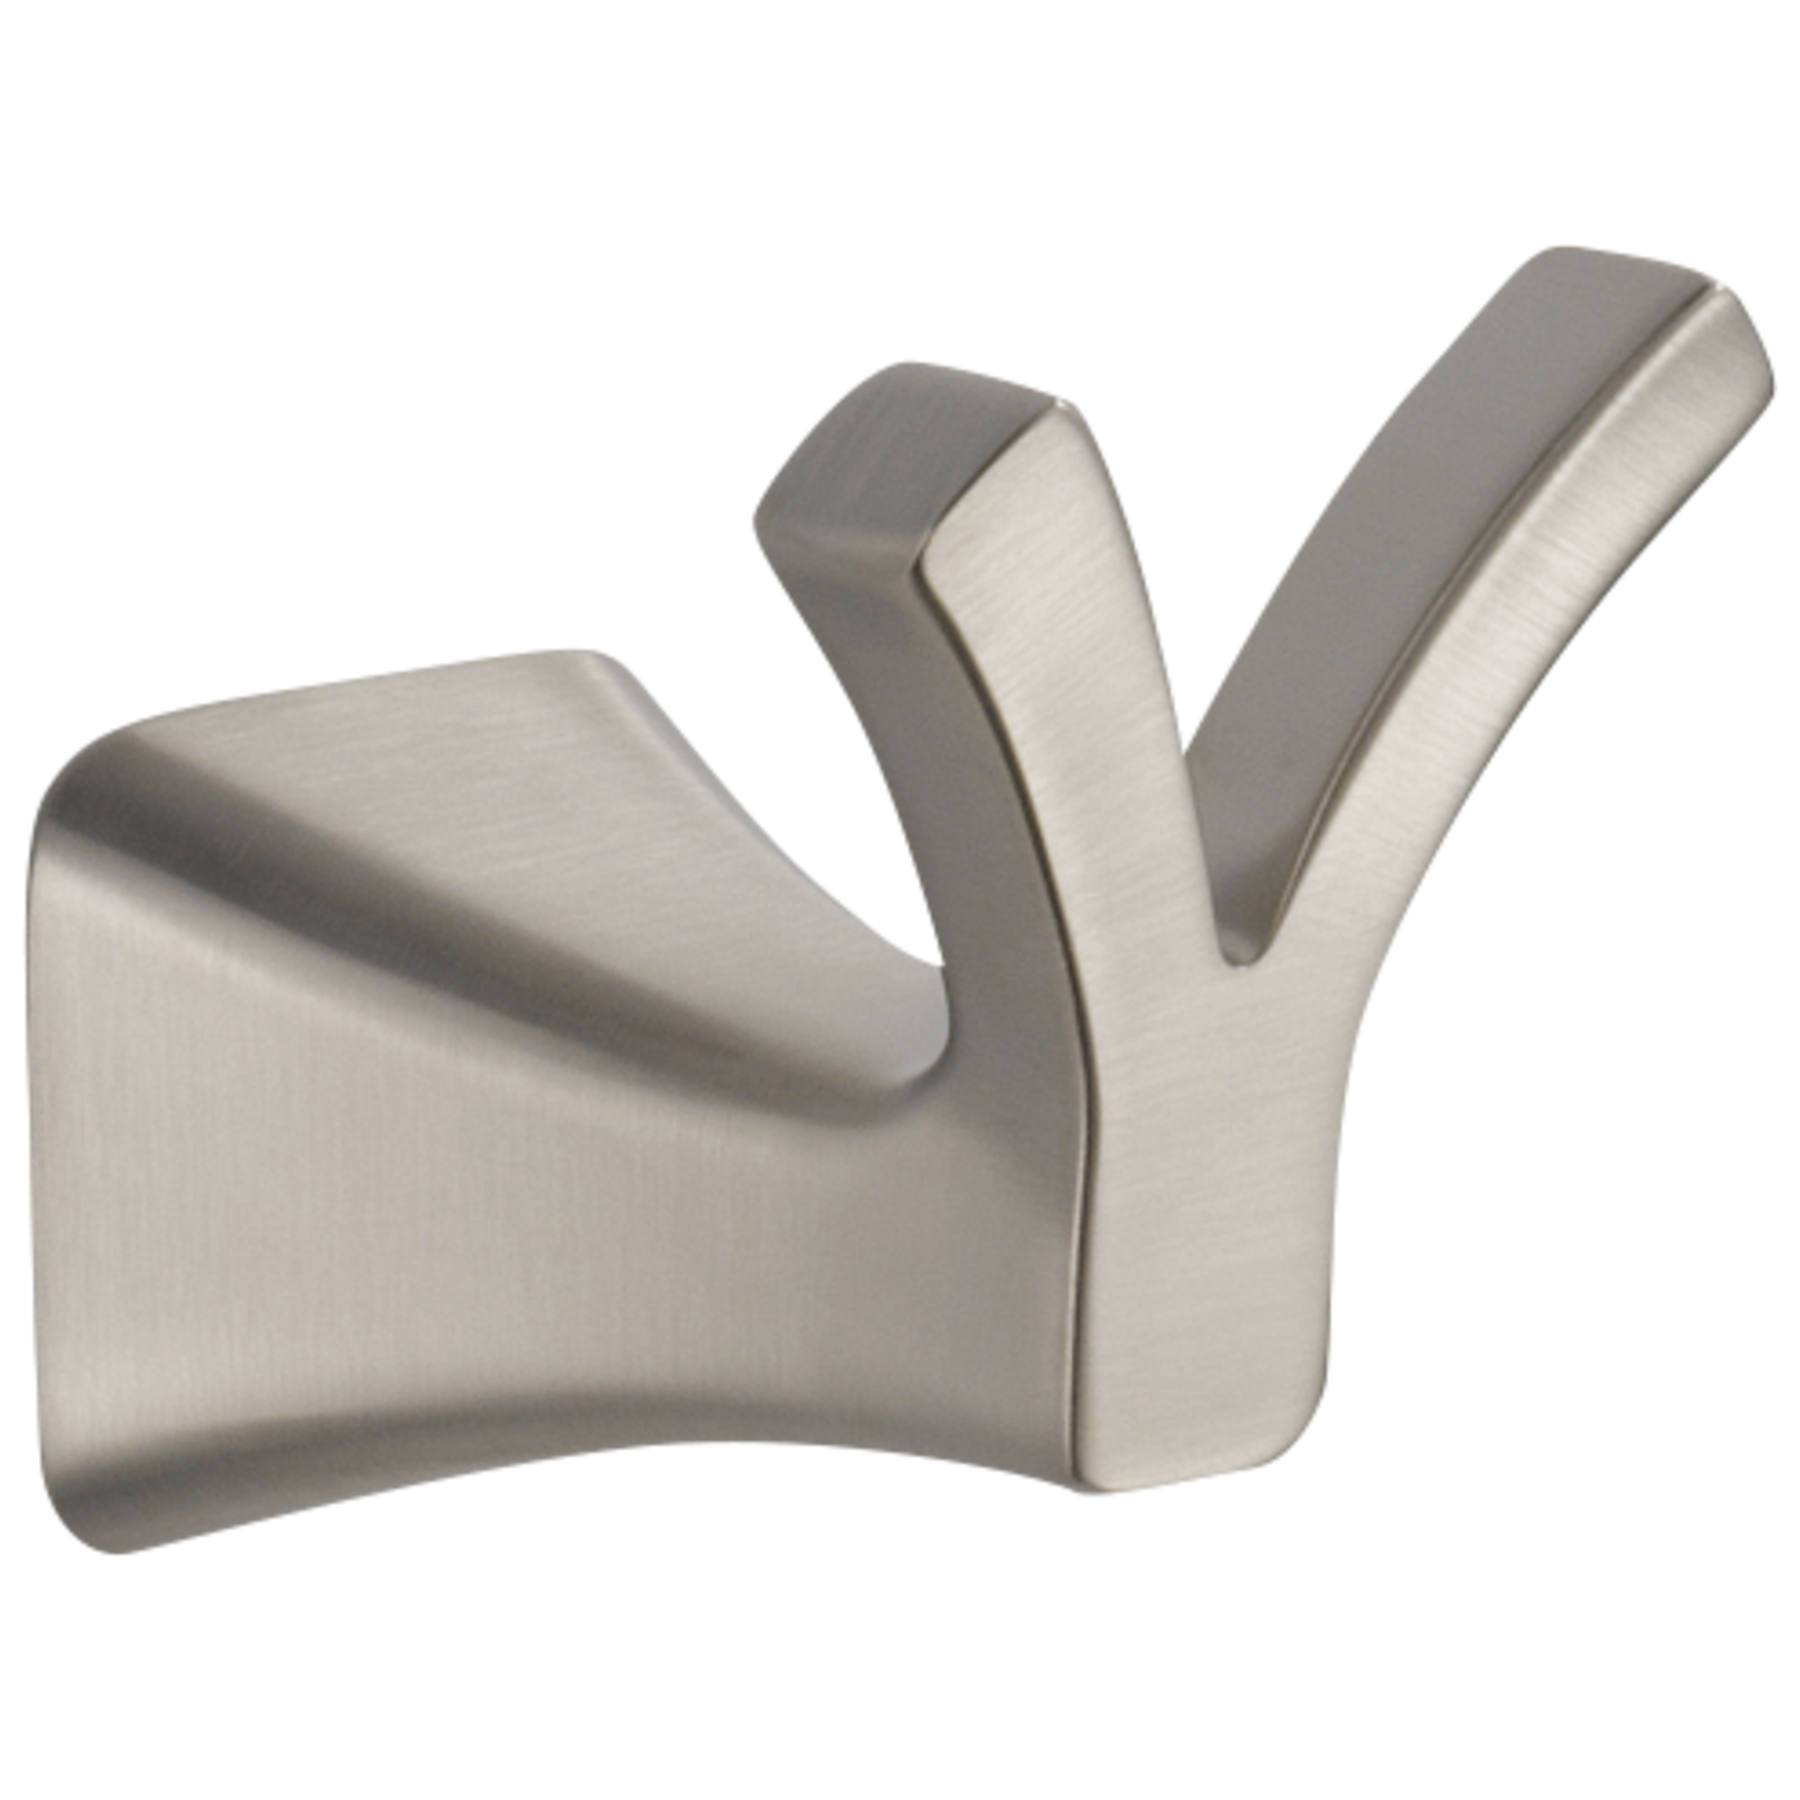 Delta FND35-SS Foundations Double Robe Hook in Stainless